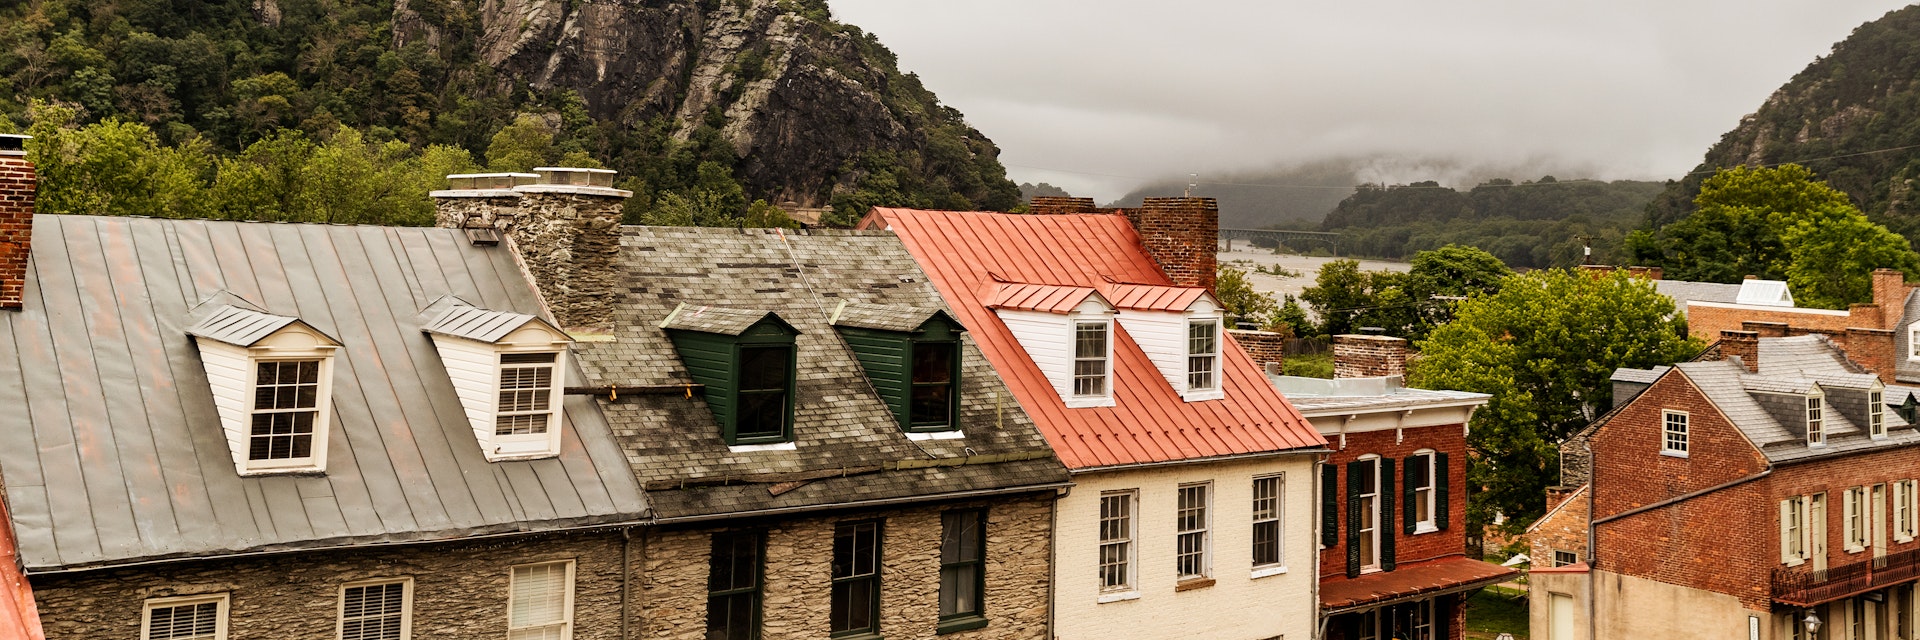 The town of Harpers Ferry, West Virginia is well-preserved as a National Historical Park.